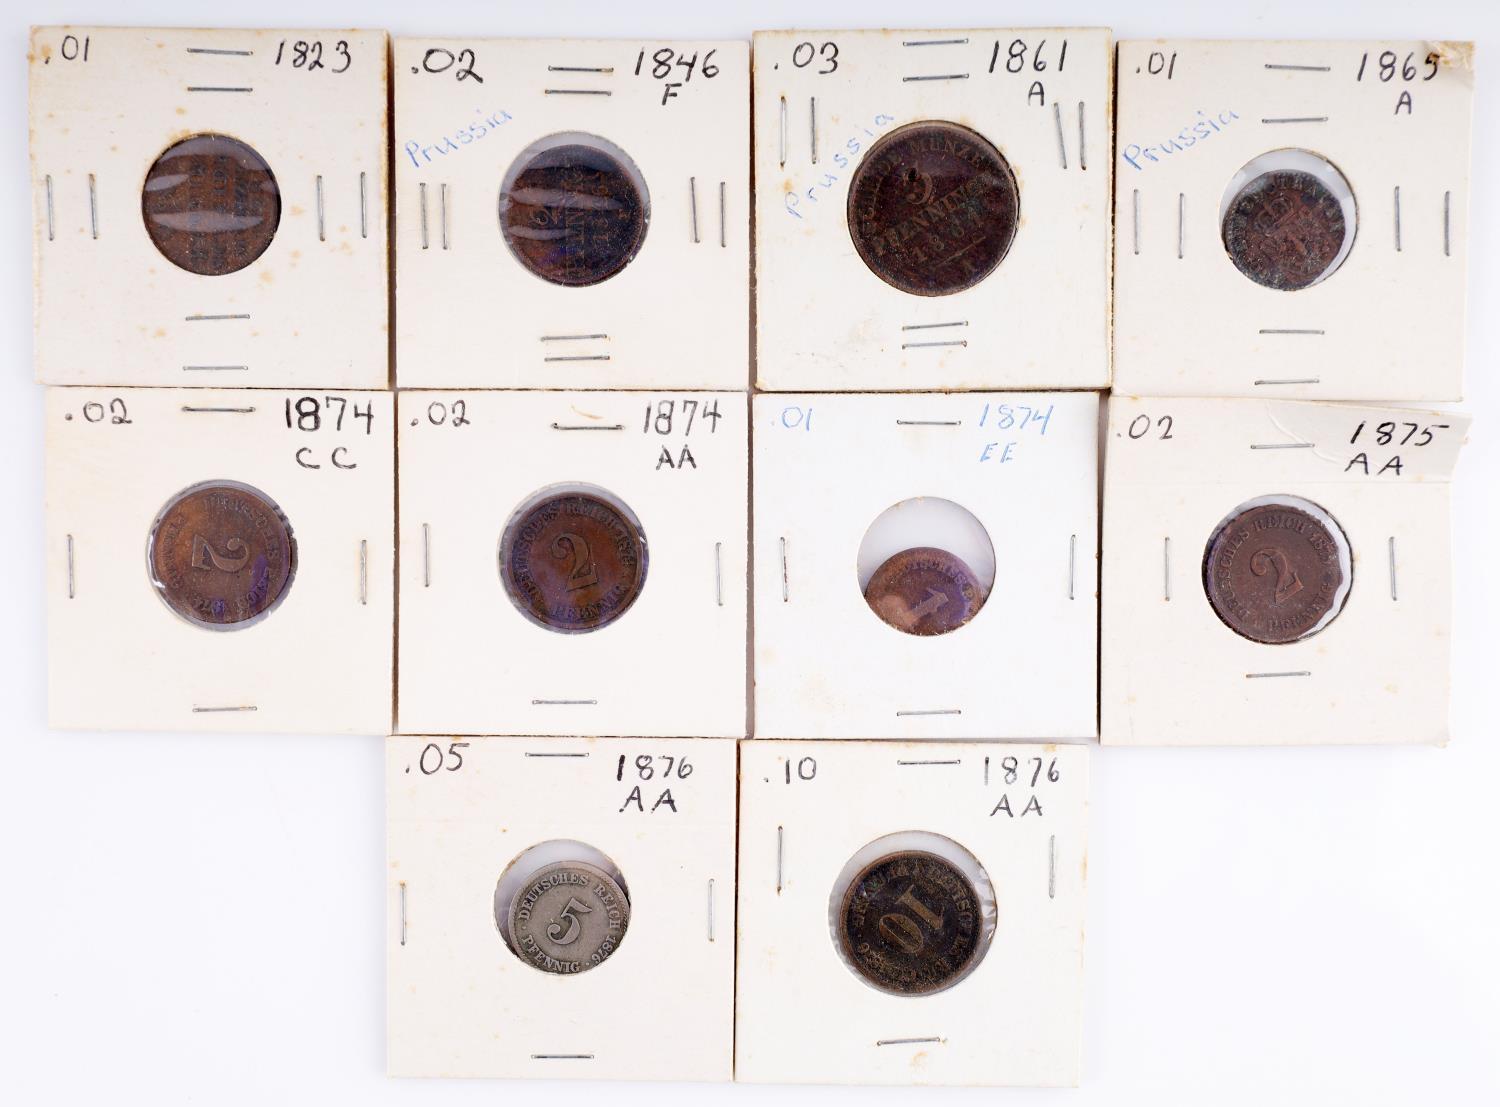 LOT OF 128 LATE 19TH C TO POST WWI GERMAN COINS